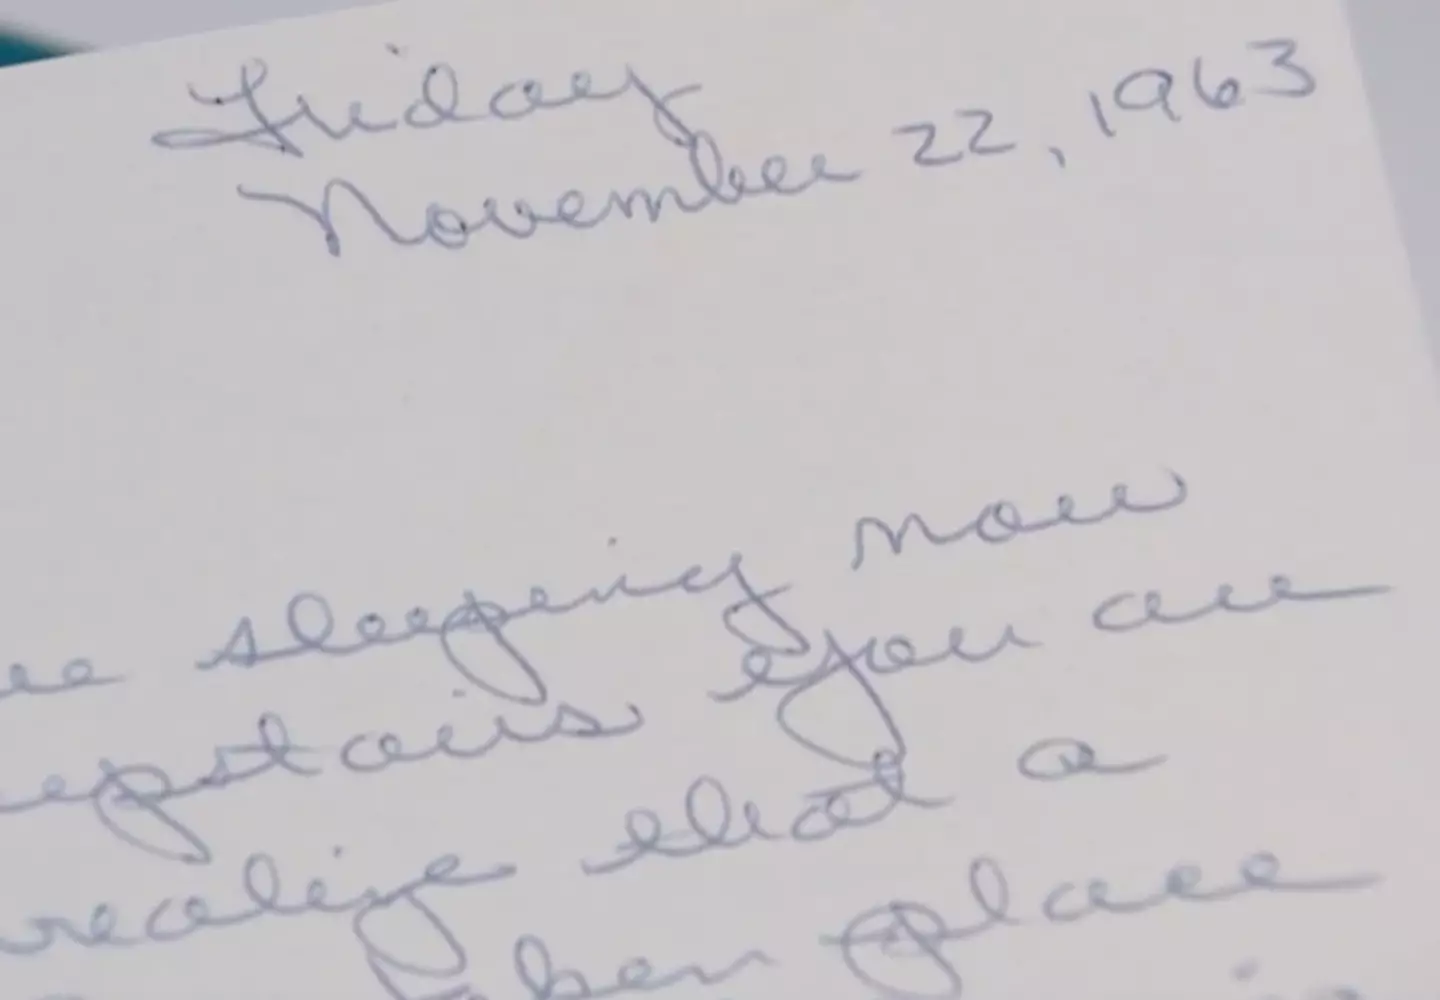 The letter described John F Kennedy as a leader.